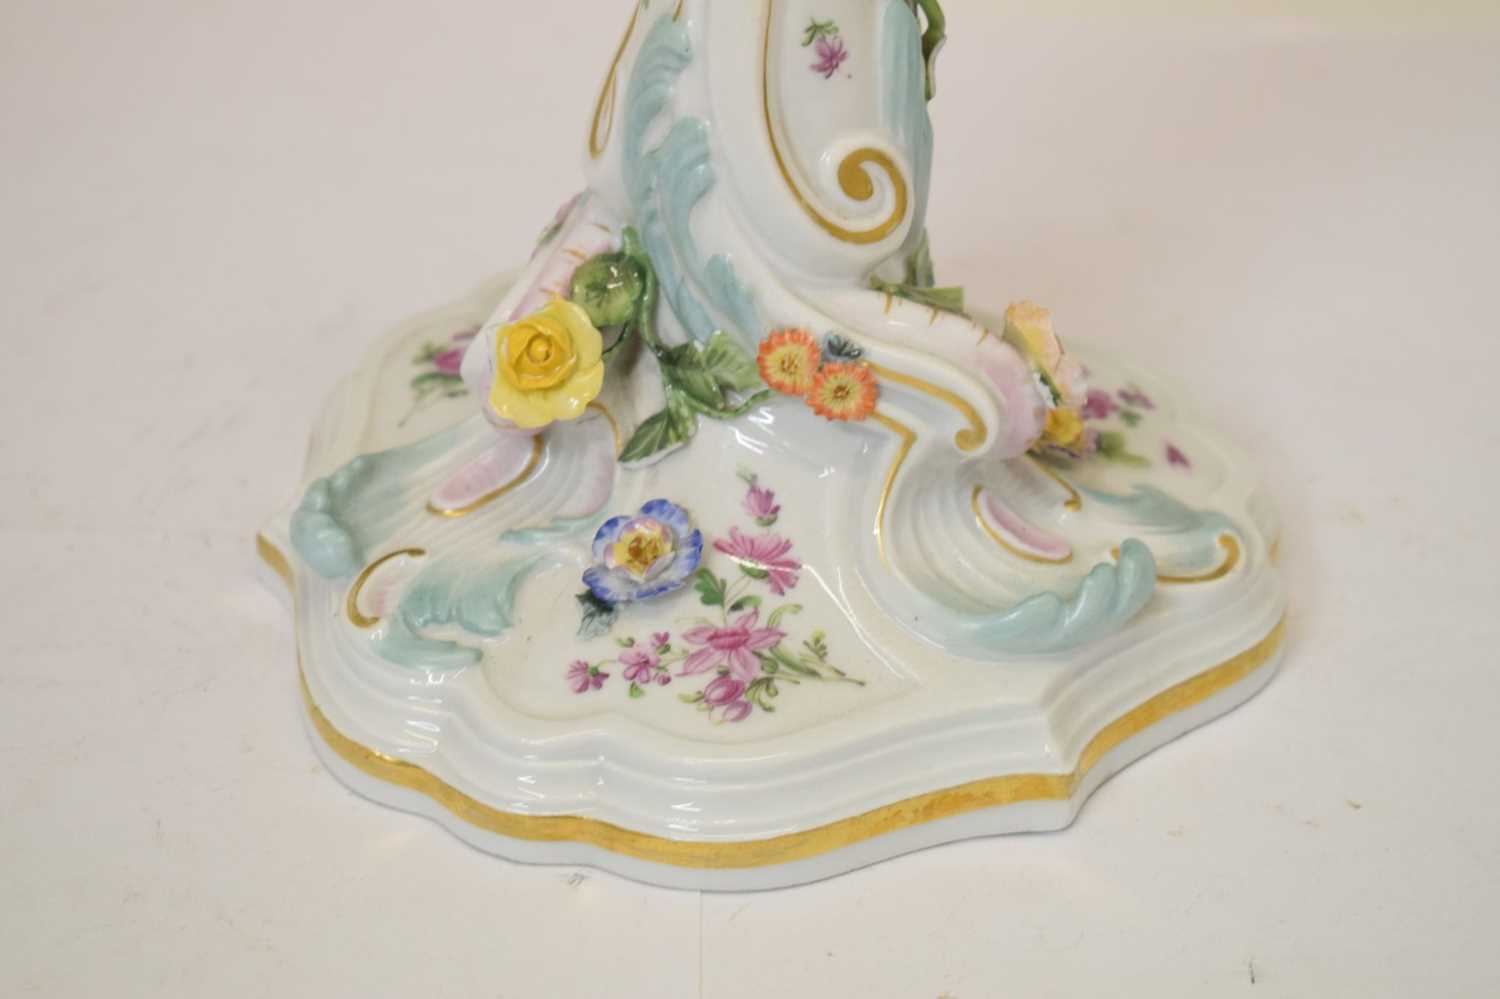 Late 19th/early 20th century Meissen porcelain candlestick - Image 6 of 9